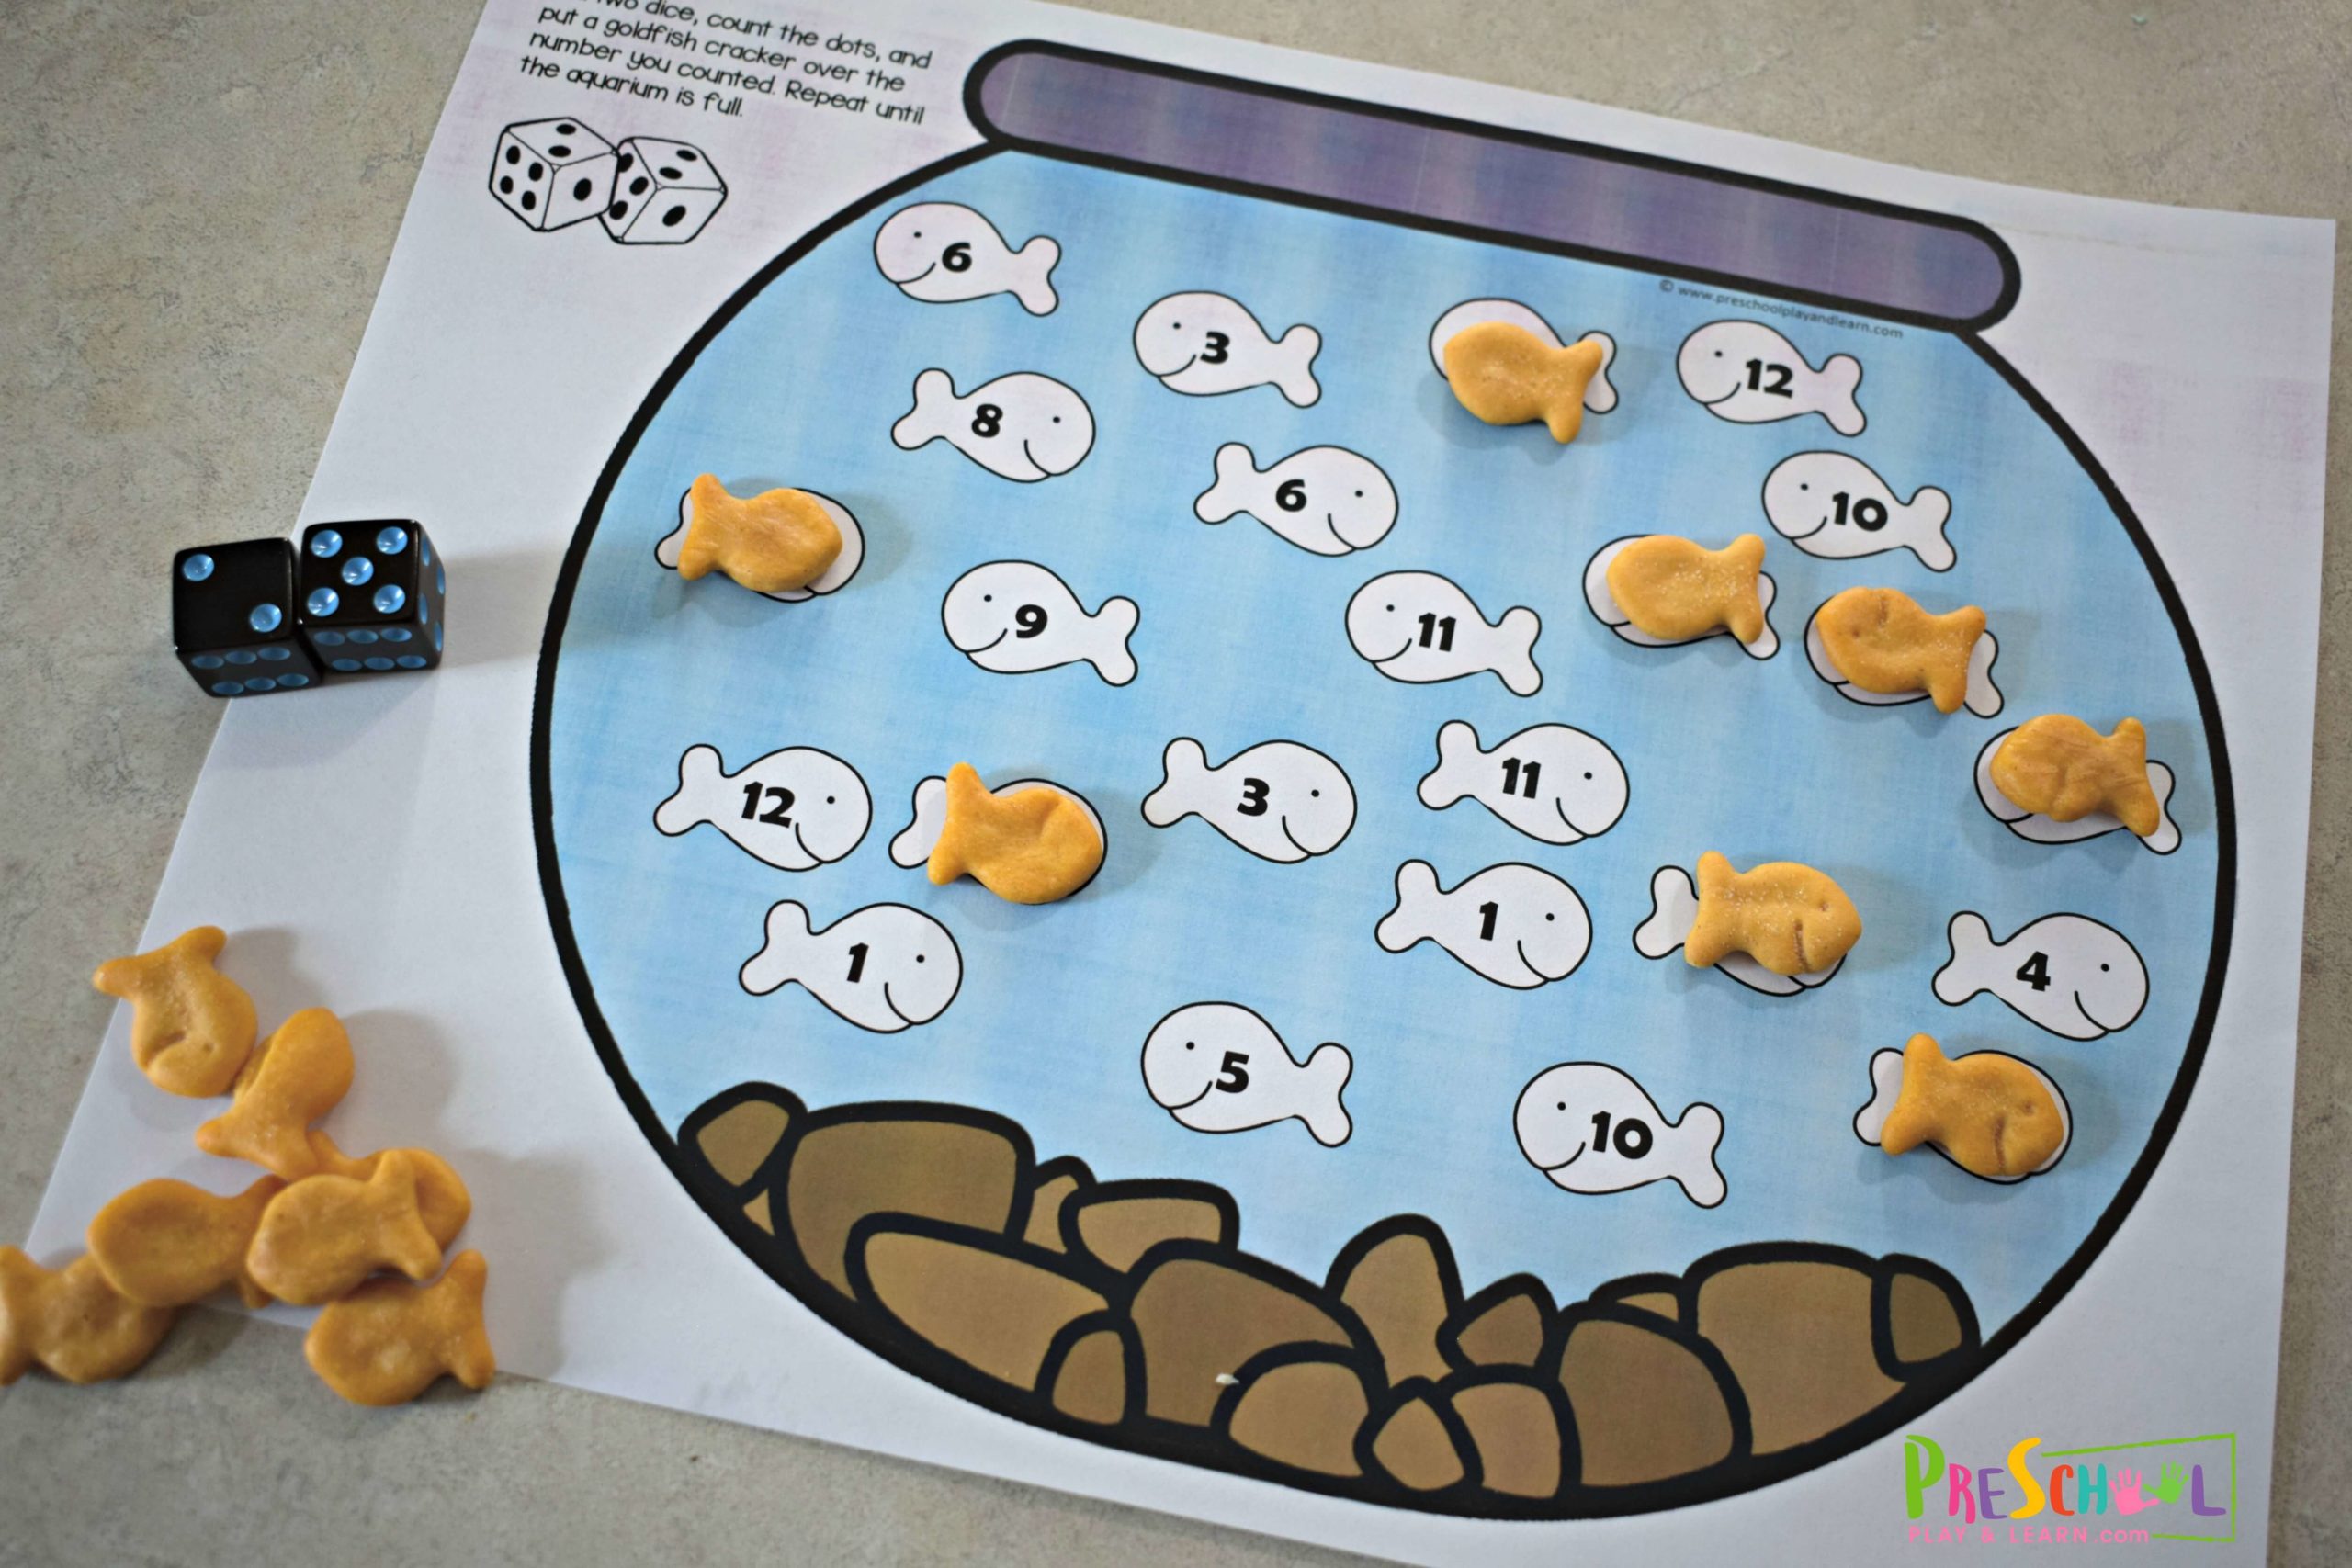 goldfish-counting-activity-w-free-printable